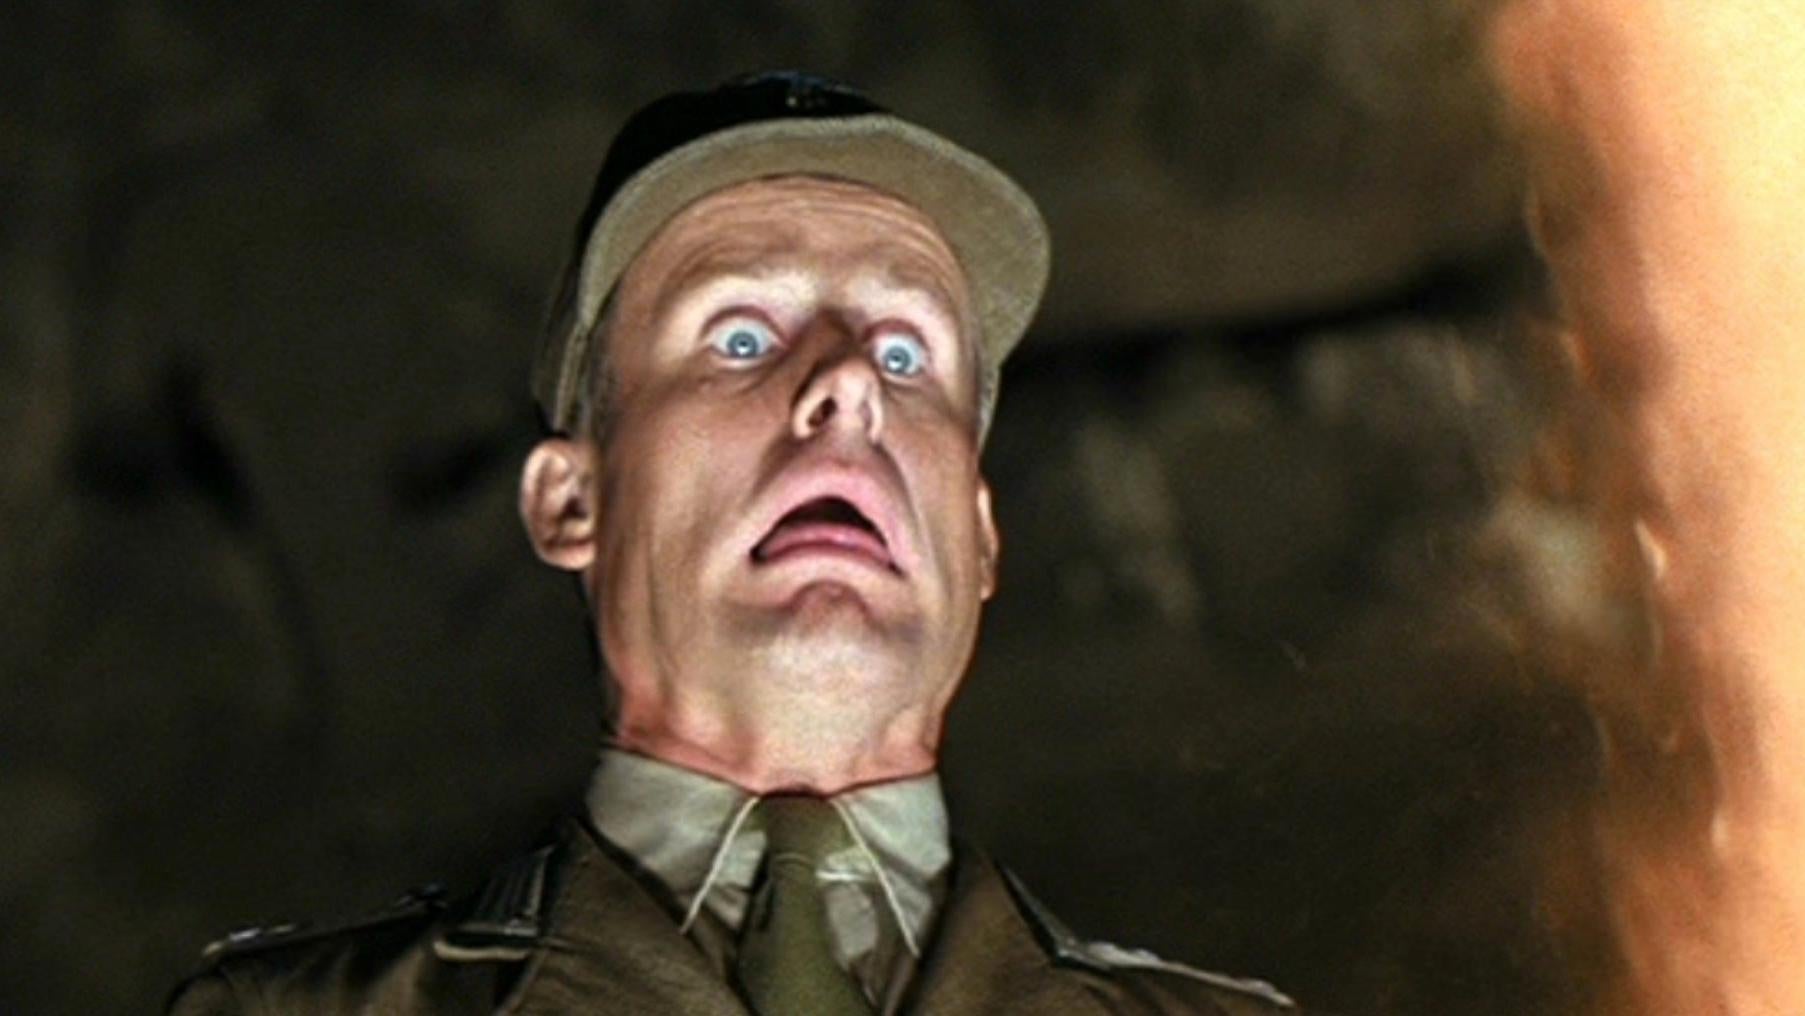 This man's face is about to melt in the PG Raiders of the Lost Ark. (Image: Paramount)